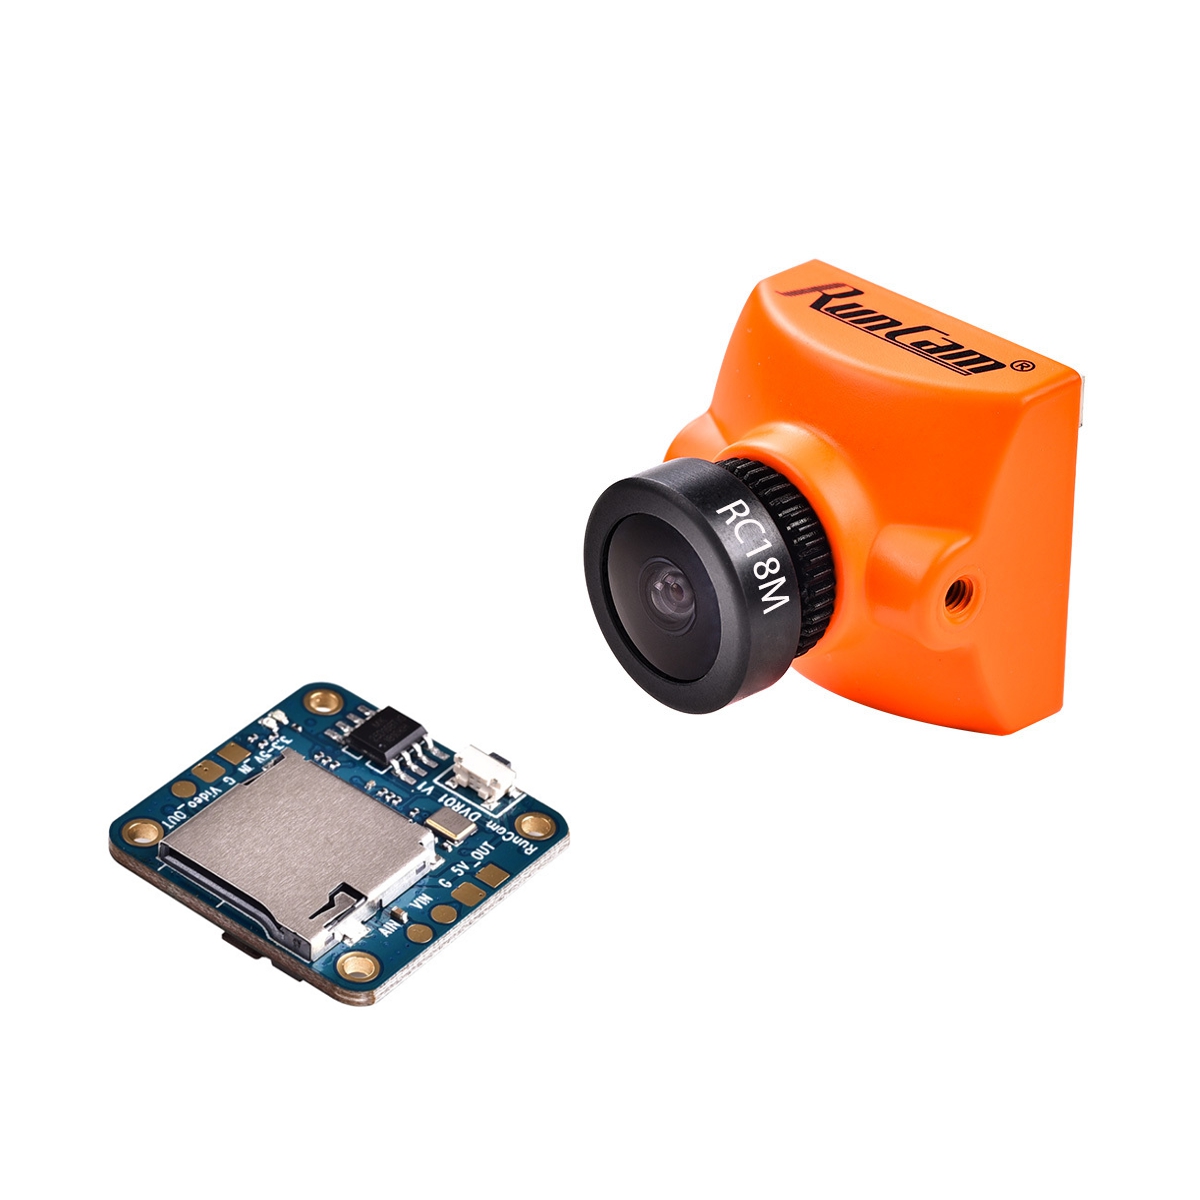 

RunCam Racer 2 + Mini DVR Remote Control Super WDR CMOS 700TVL 1.8mm/2.1mm fpv Camera 6ms Low Latancy OSD With Selector